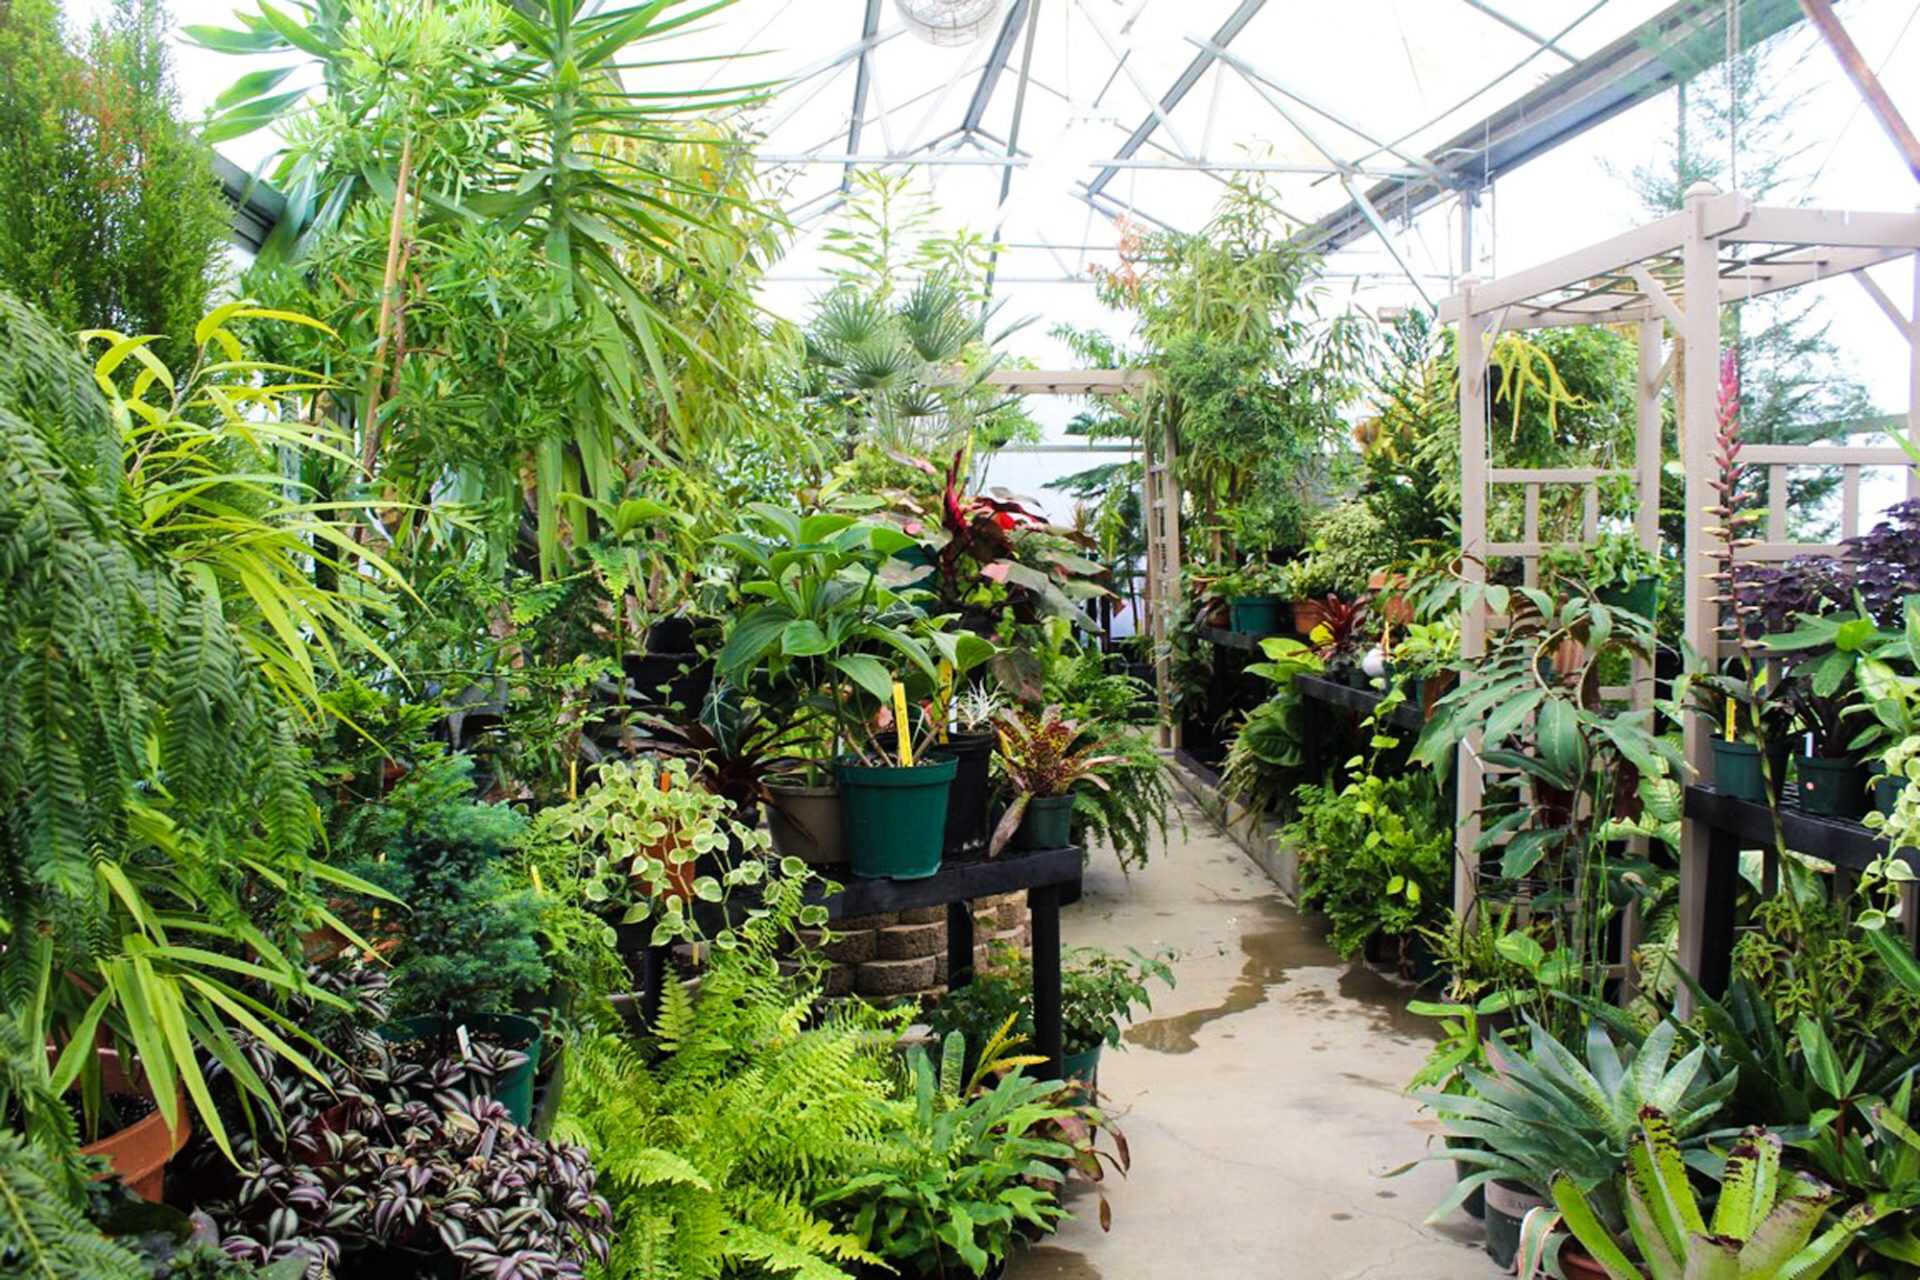 The Appalachian State Biology Greenhouse is located off of State Farm Road. Its conservatory contains over 900 plant species. 